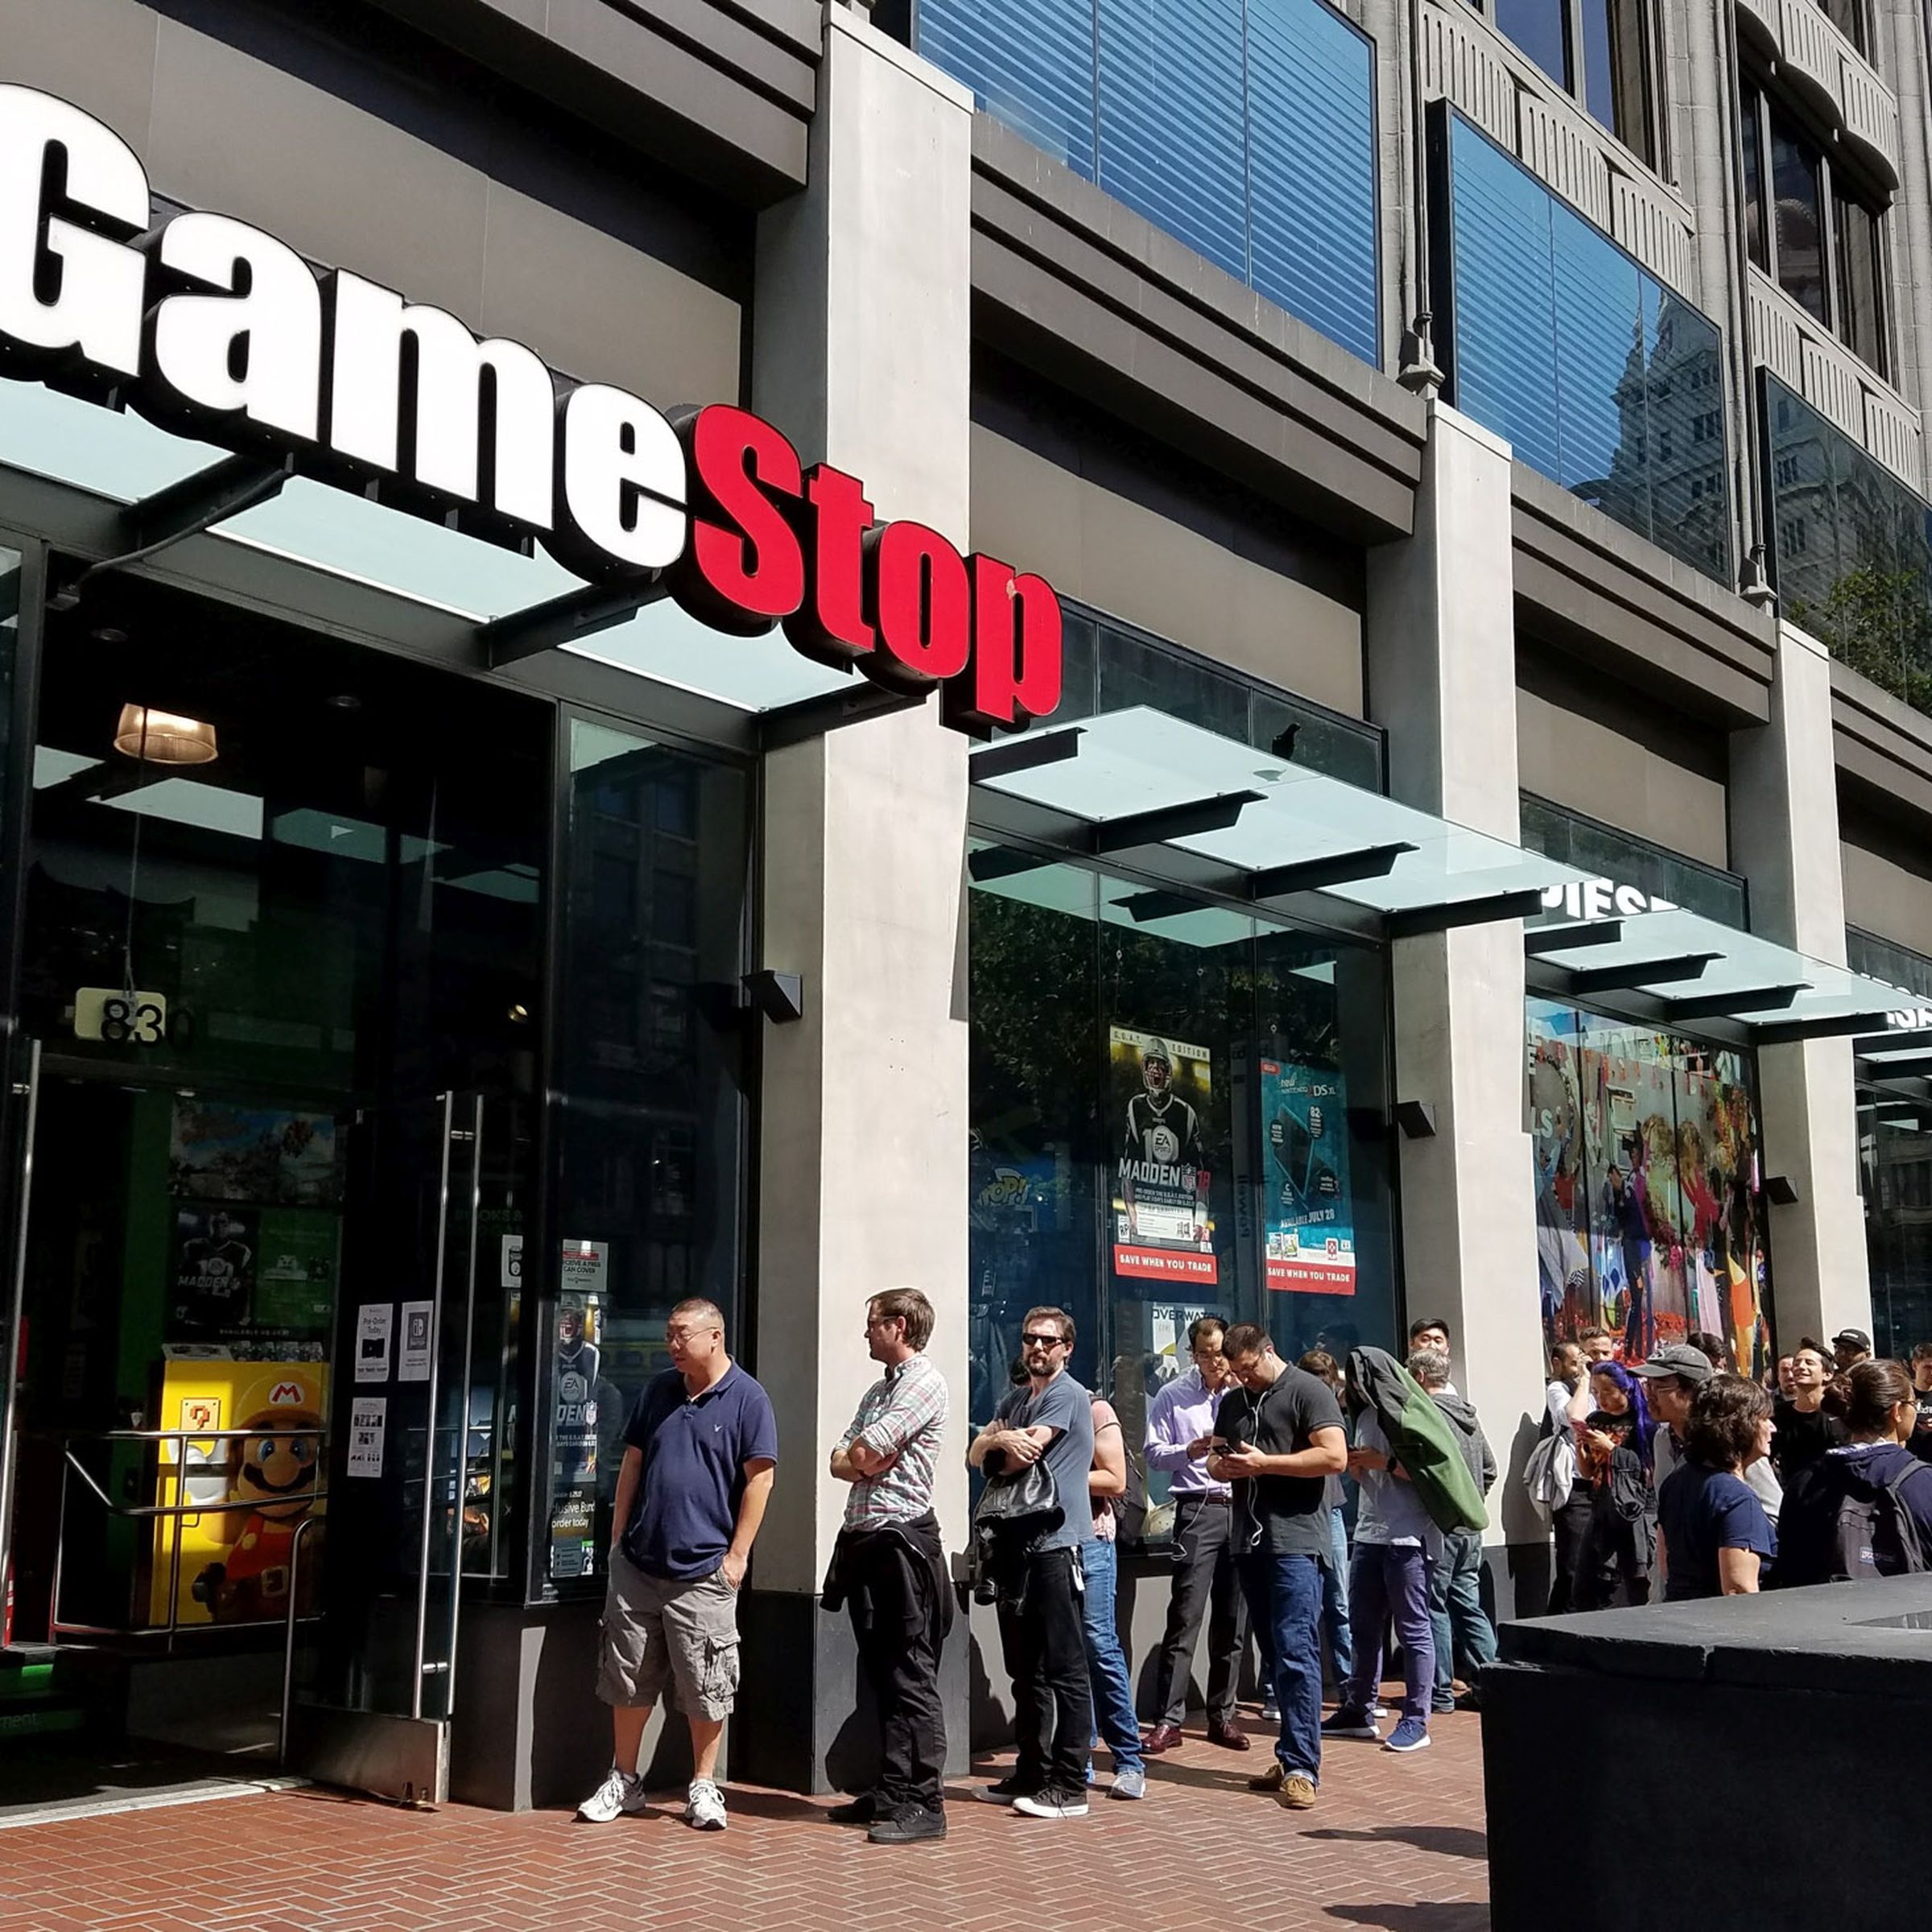 An image showing the entrance to GameStop